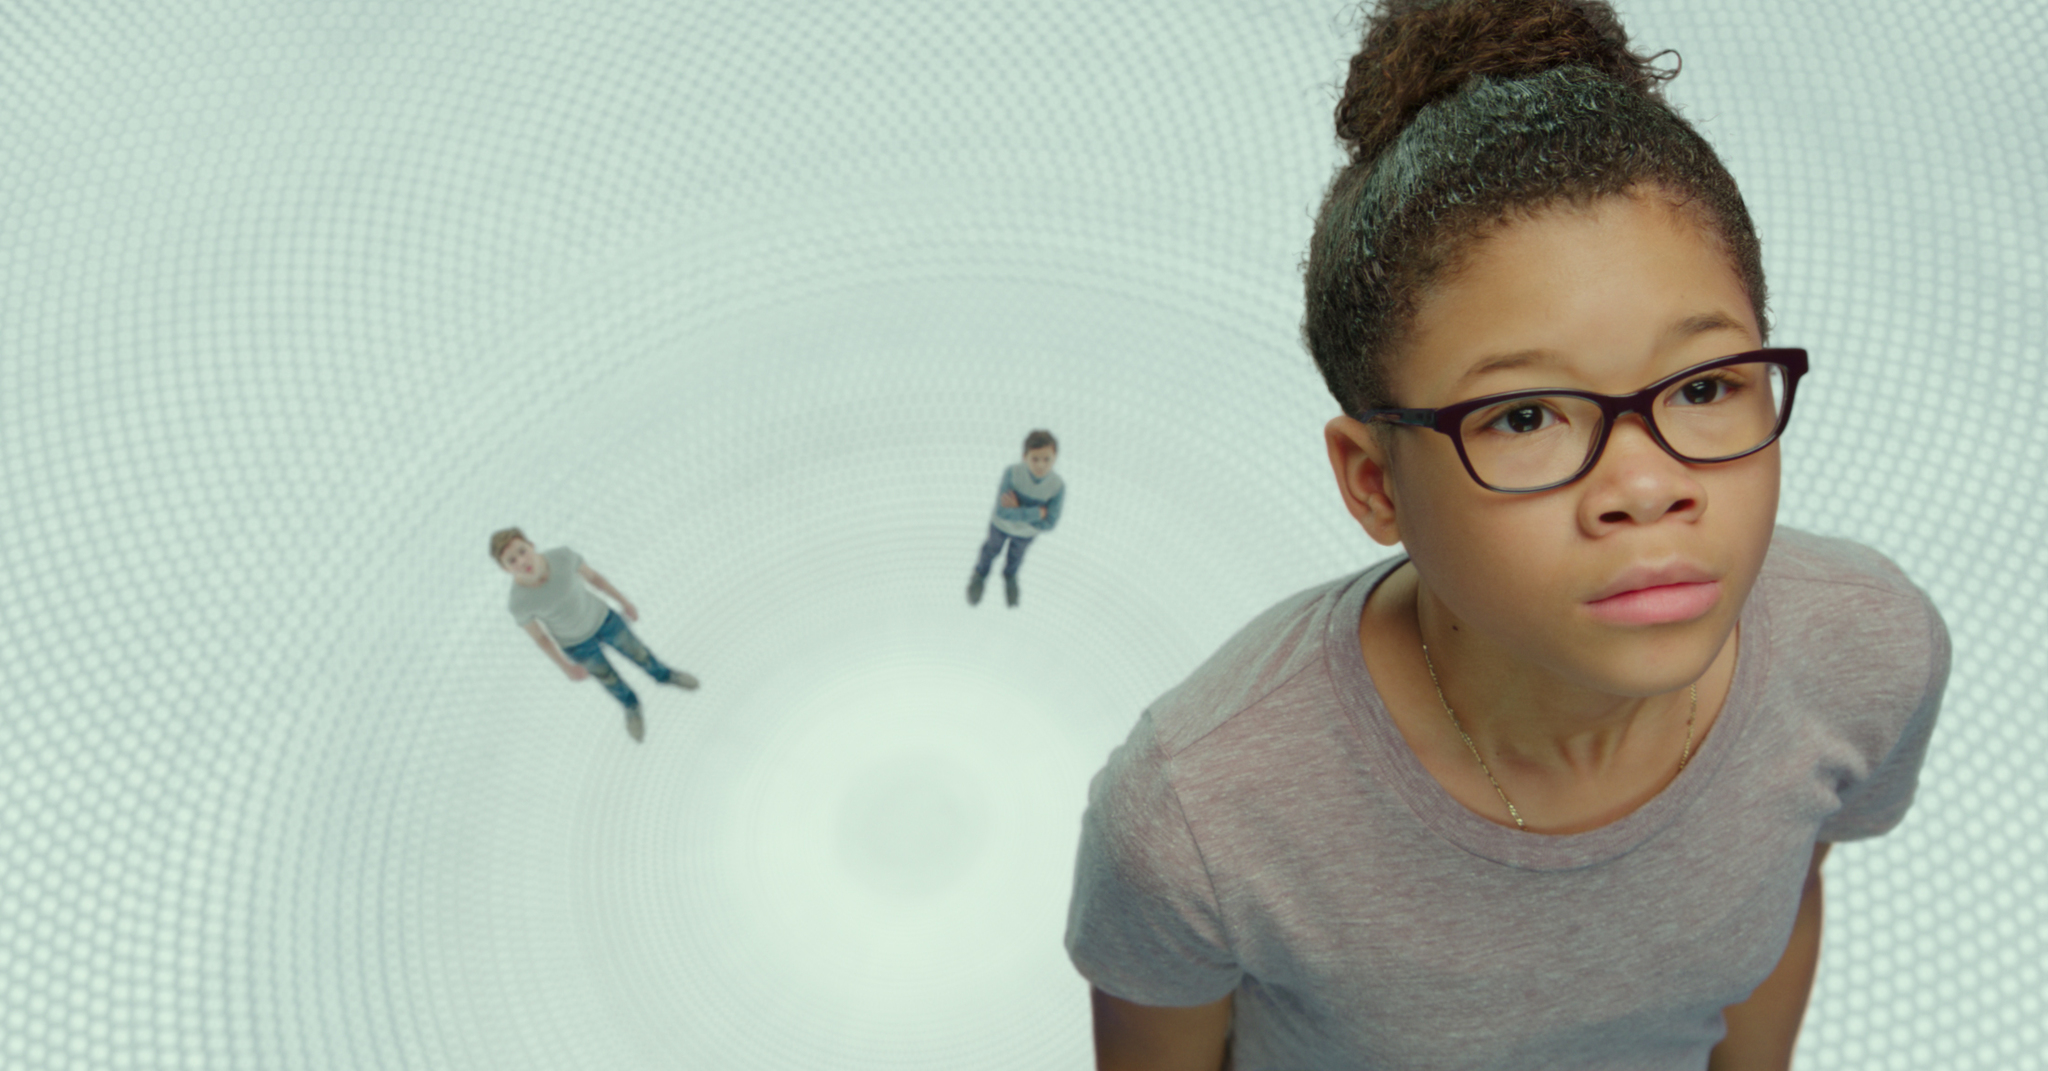 A Wrinkle In Time Movie 2018 Wallpapers